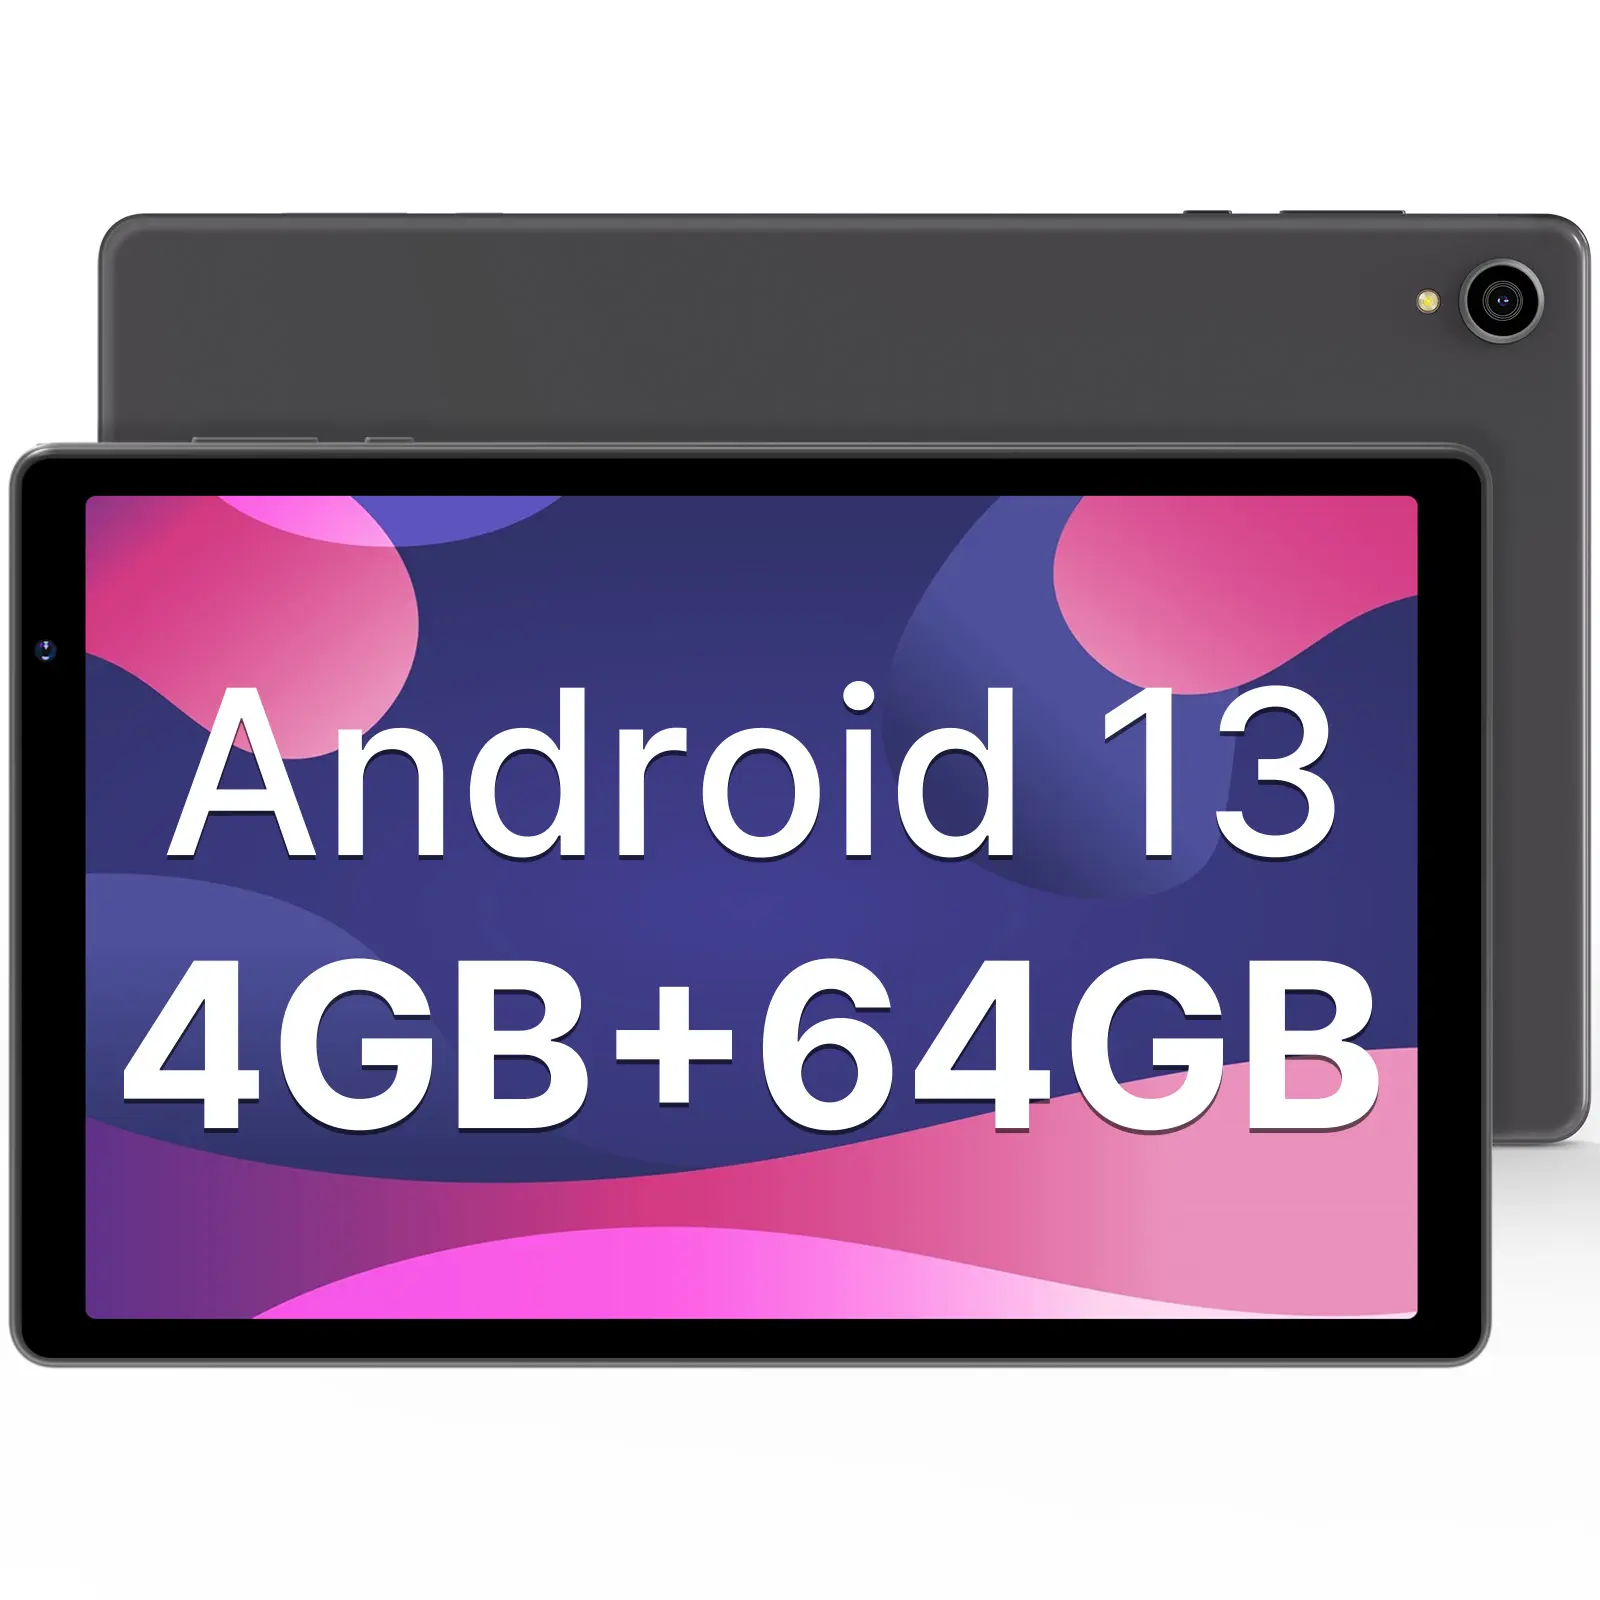 All'ingrosso OEM 10.1 pollici touch screen 4G + 64G 8core1280*800 WiFi android 13 muslimableta produttore tablet pc